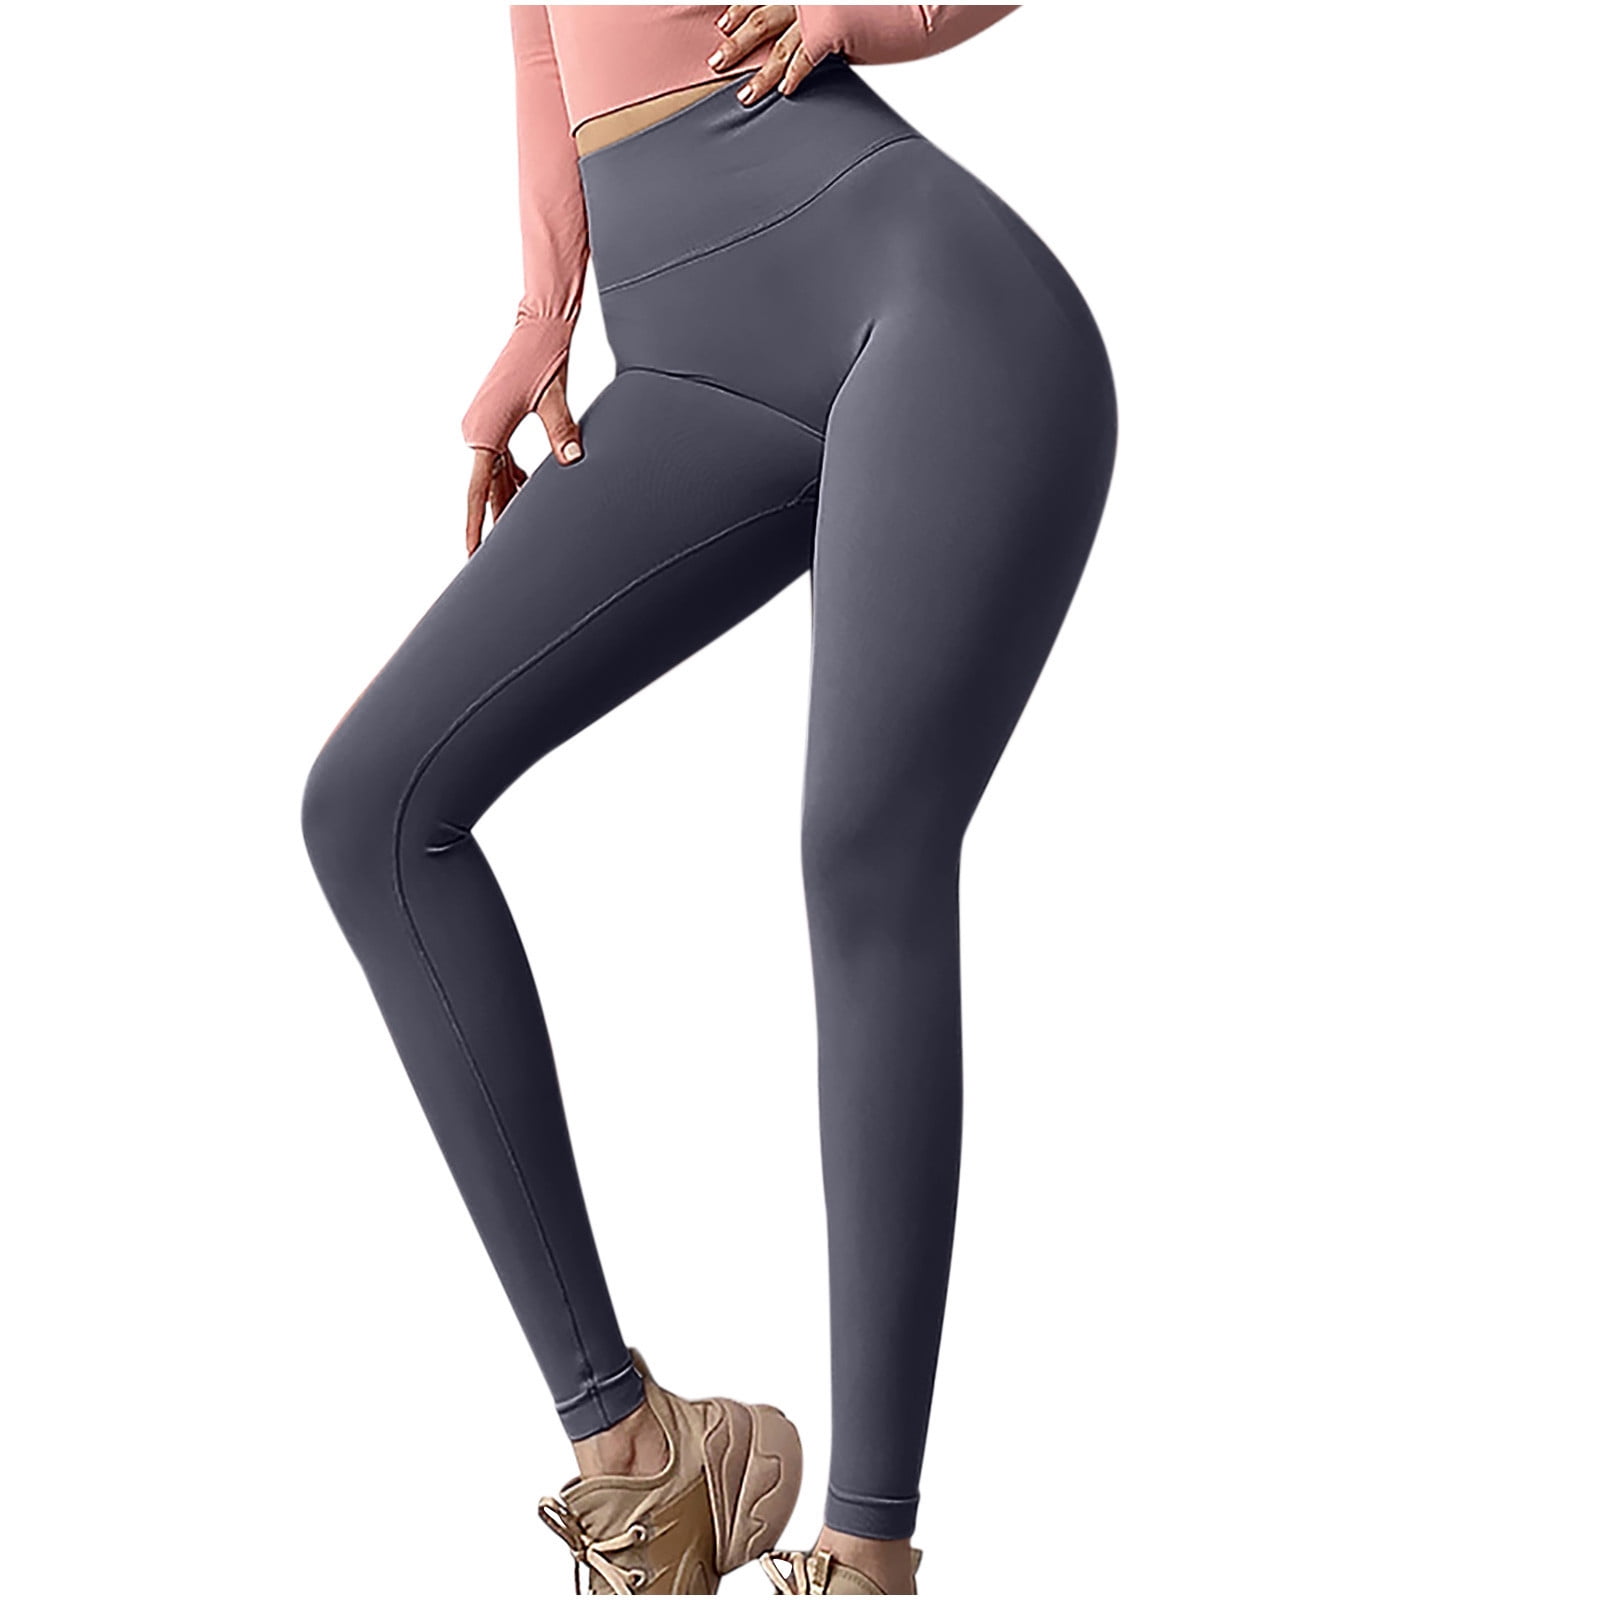 YWDJ High Compression Leggings for Women Casual Solid Pants Mid